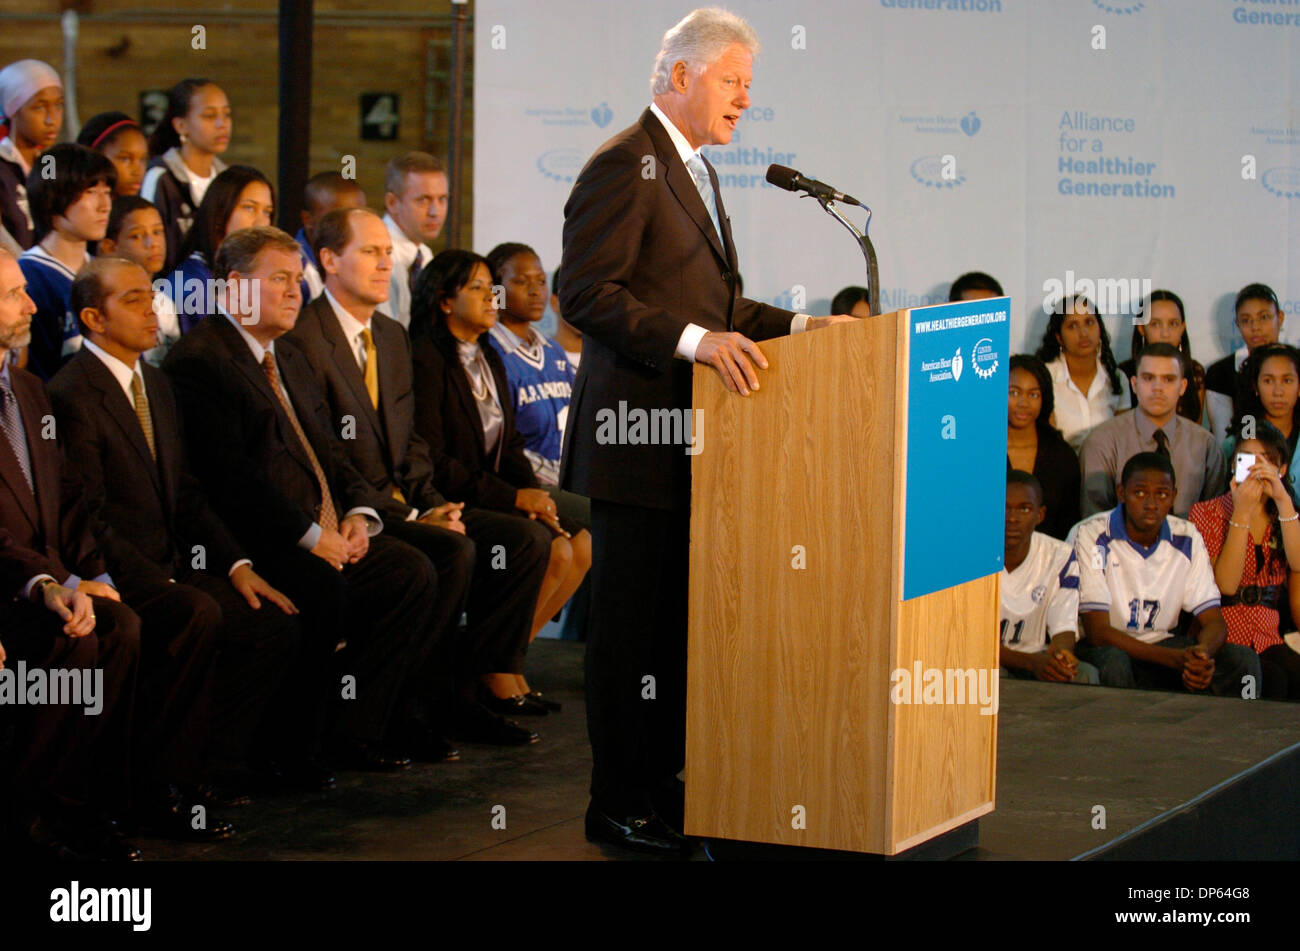 Oct 06, 2006; Manhattan, NY, USA; Former President BILL CLINTON and the American Heart Association announce a joint agreement between Alliance For A Healthier Generation and food industry leaders to set first-ever voluntary guidelines for snacks and side items sold in schools aimed a providing healthier food choices for children in a press conference at Harlem's A Philip Randolph H Stock Photo